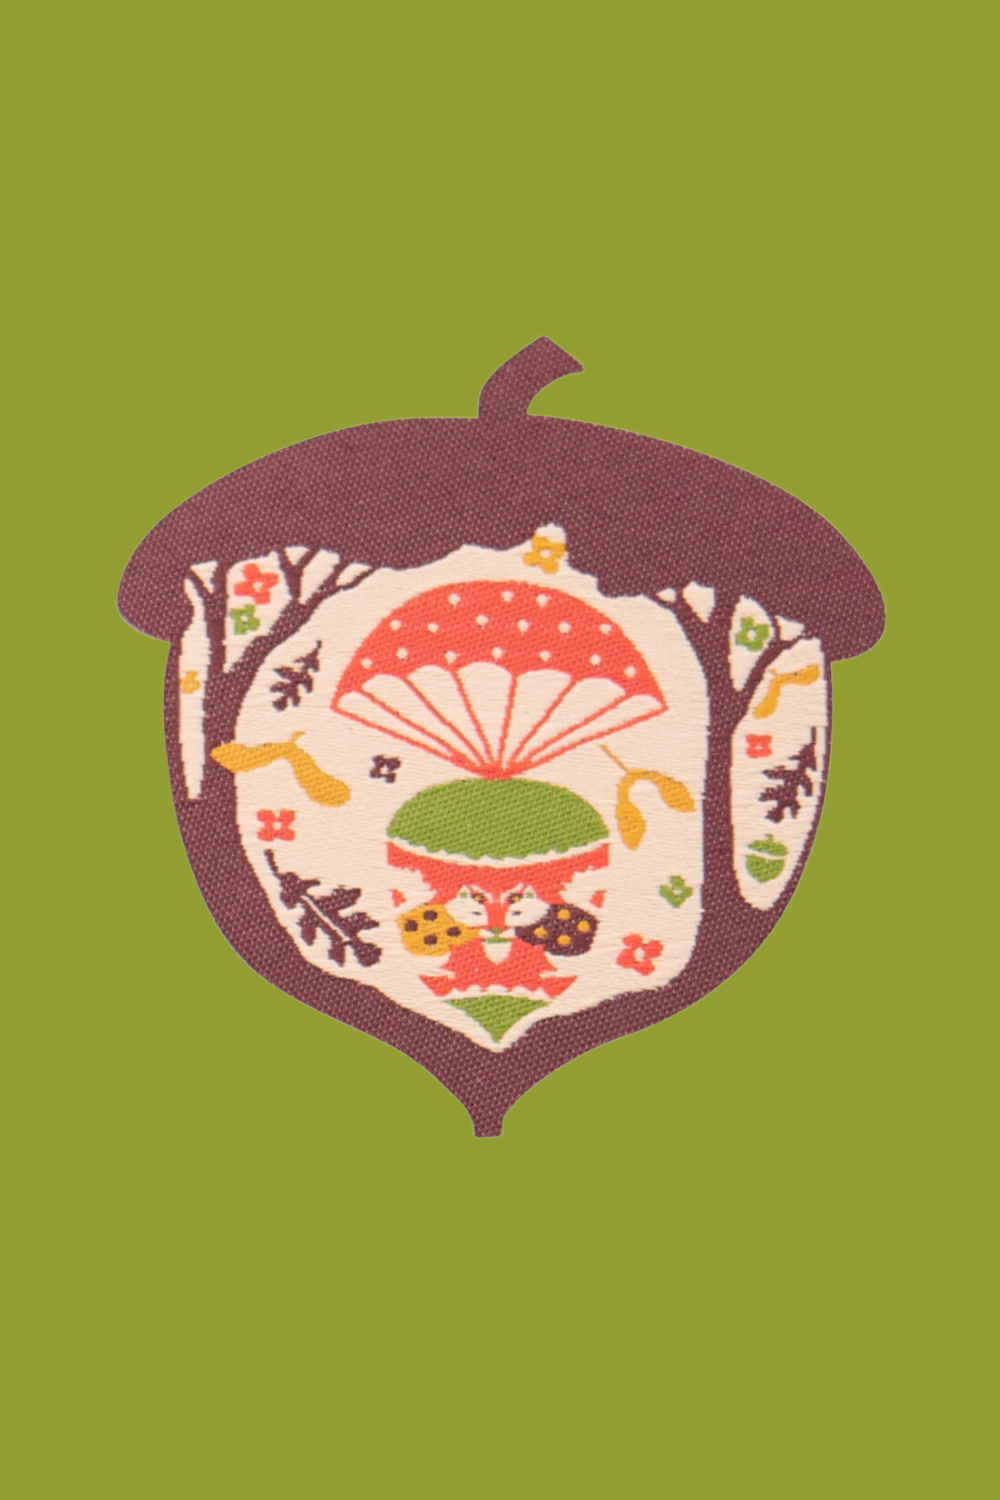 Brown, green and orange acorn-shaped iron on patch with parachuting squirrels and leaves